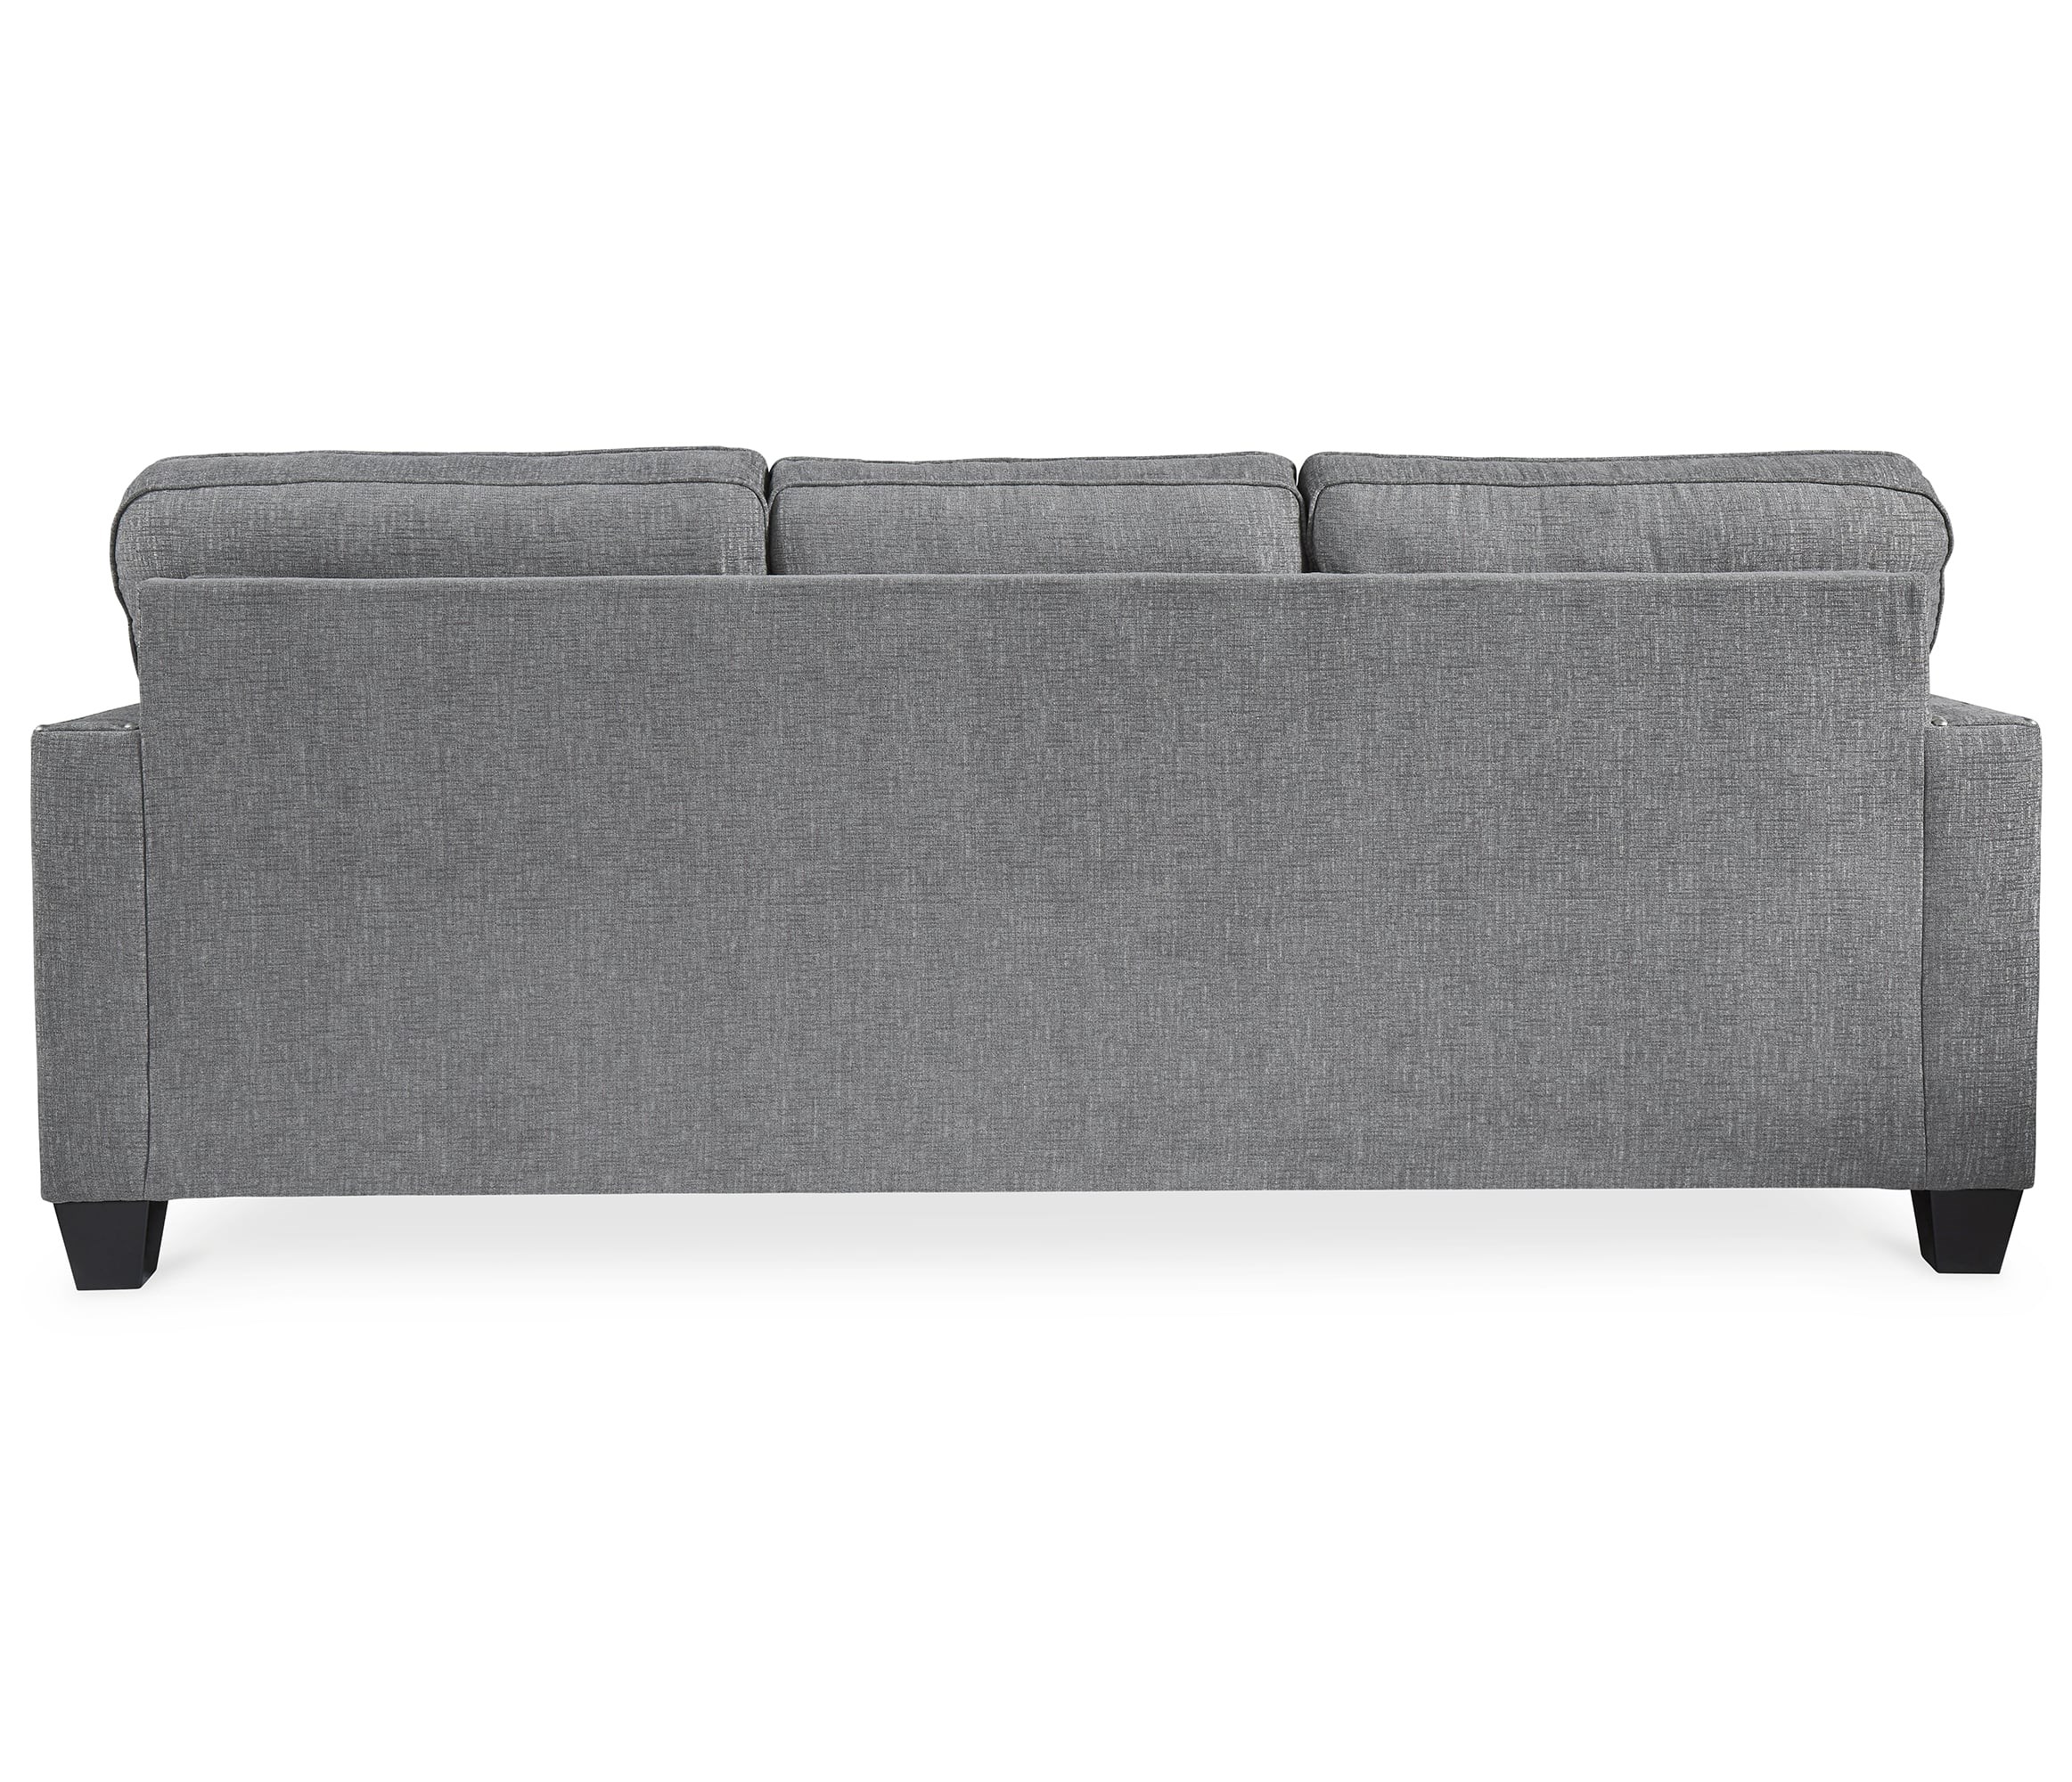 Signature Design by Ashley Barrali 1390438 Casual Sofa with Accent Pillows  | A1 Furniture u0026 Mattress | Uph - Stationary Sofas